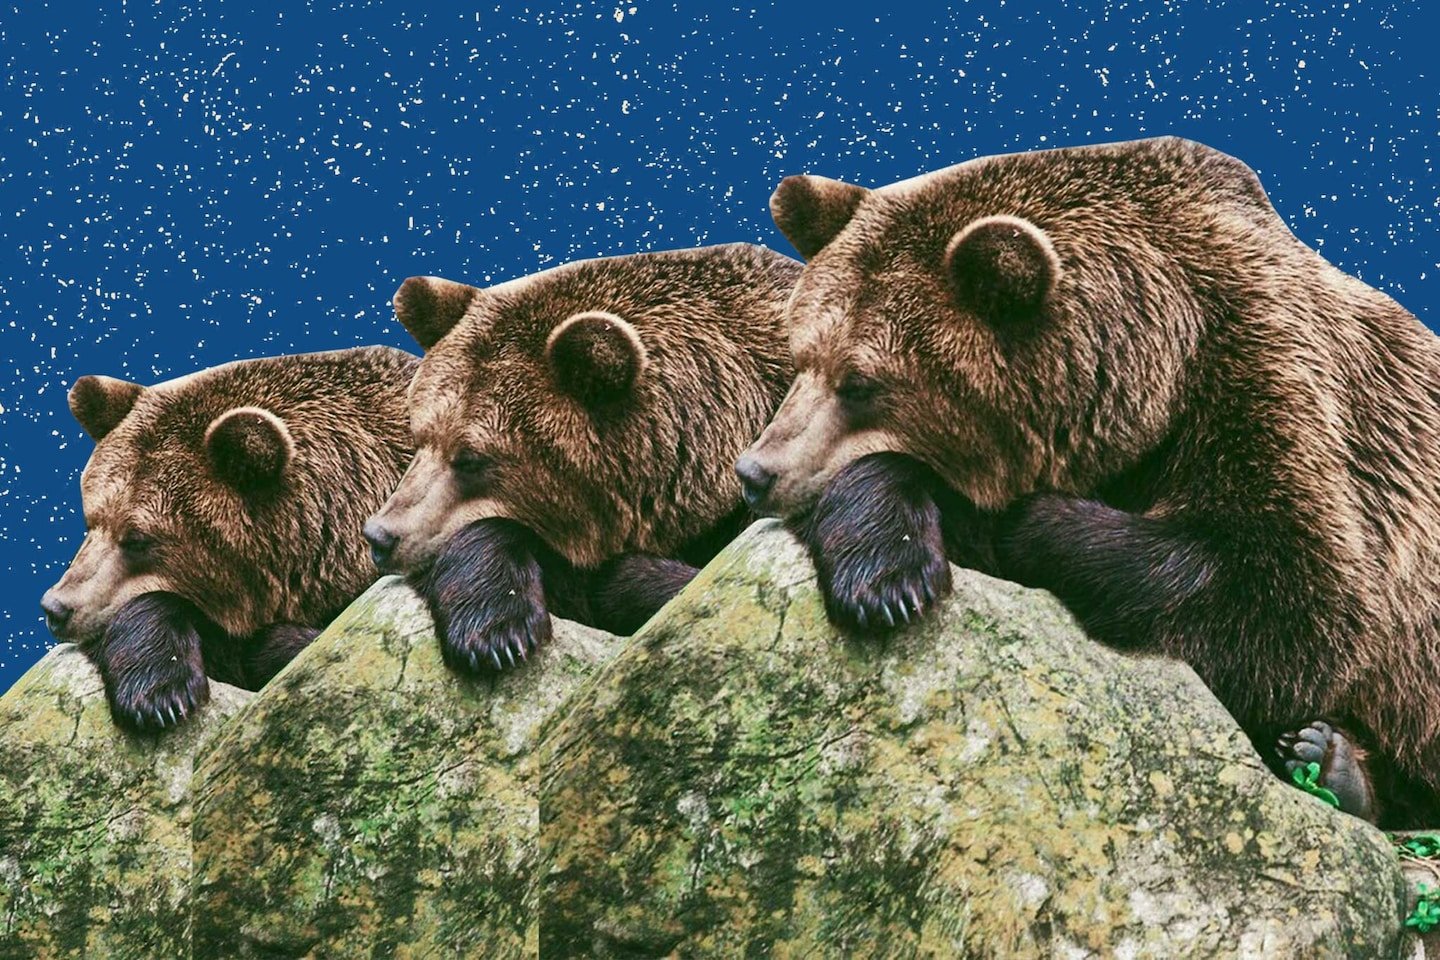 Hibernating fat bears are complex. They may hold lessons for human health.